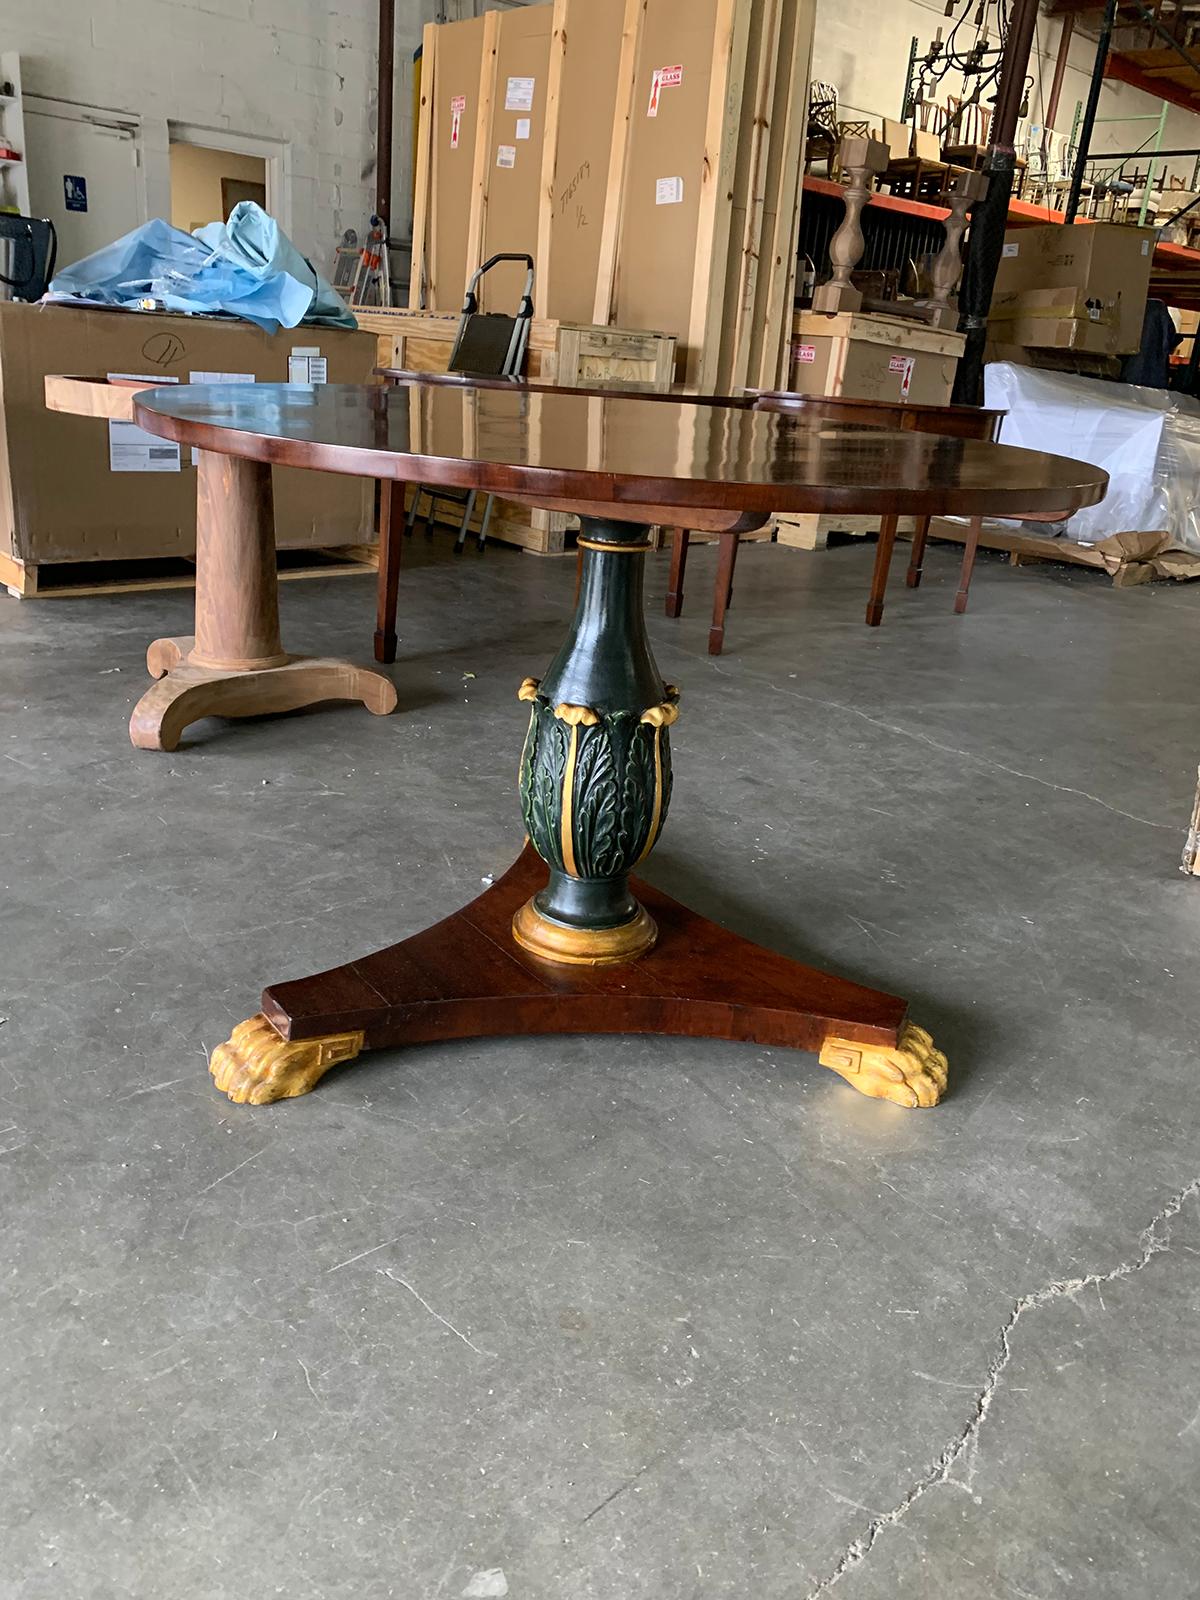 19th century neoclassical Continental center table
Incredible wood and quality. Perfect for a center hall. Beautiful carved and painted pedestal.